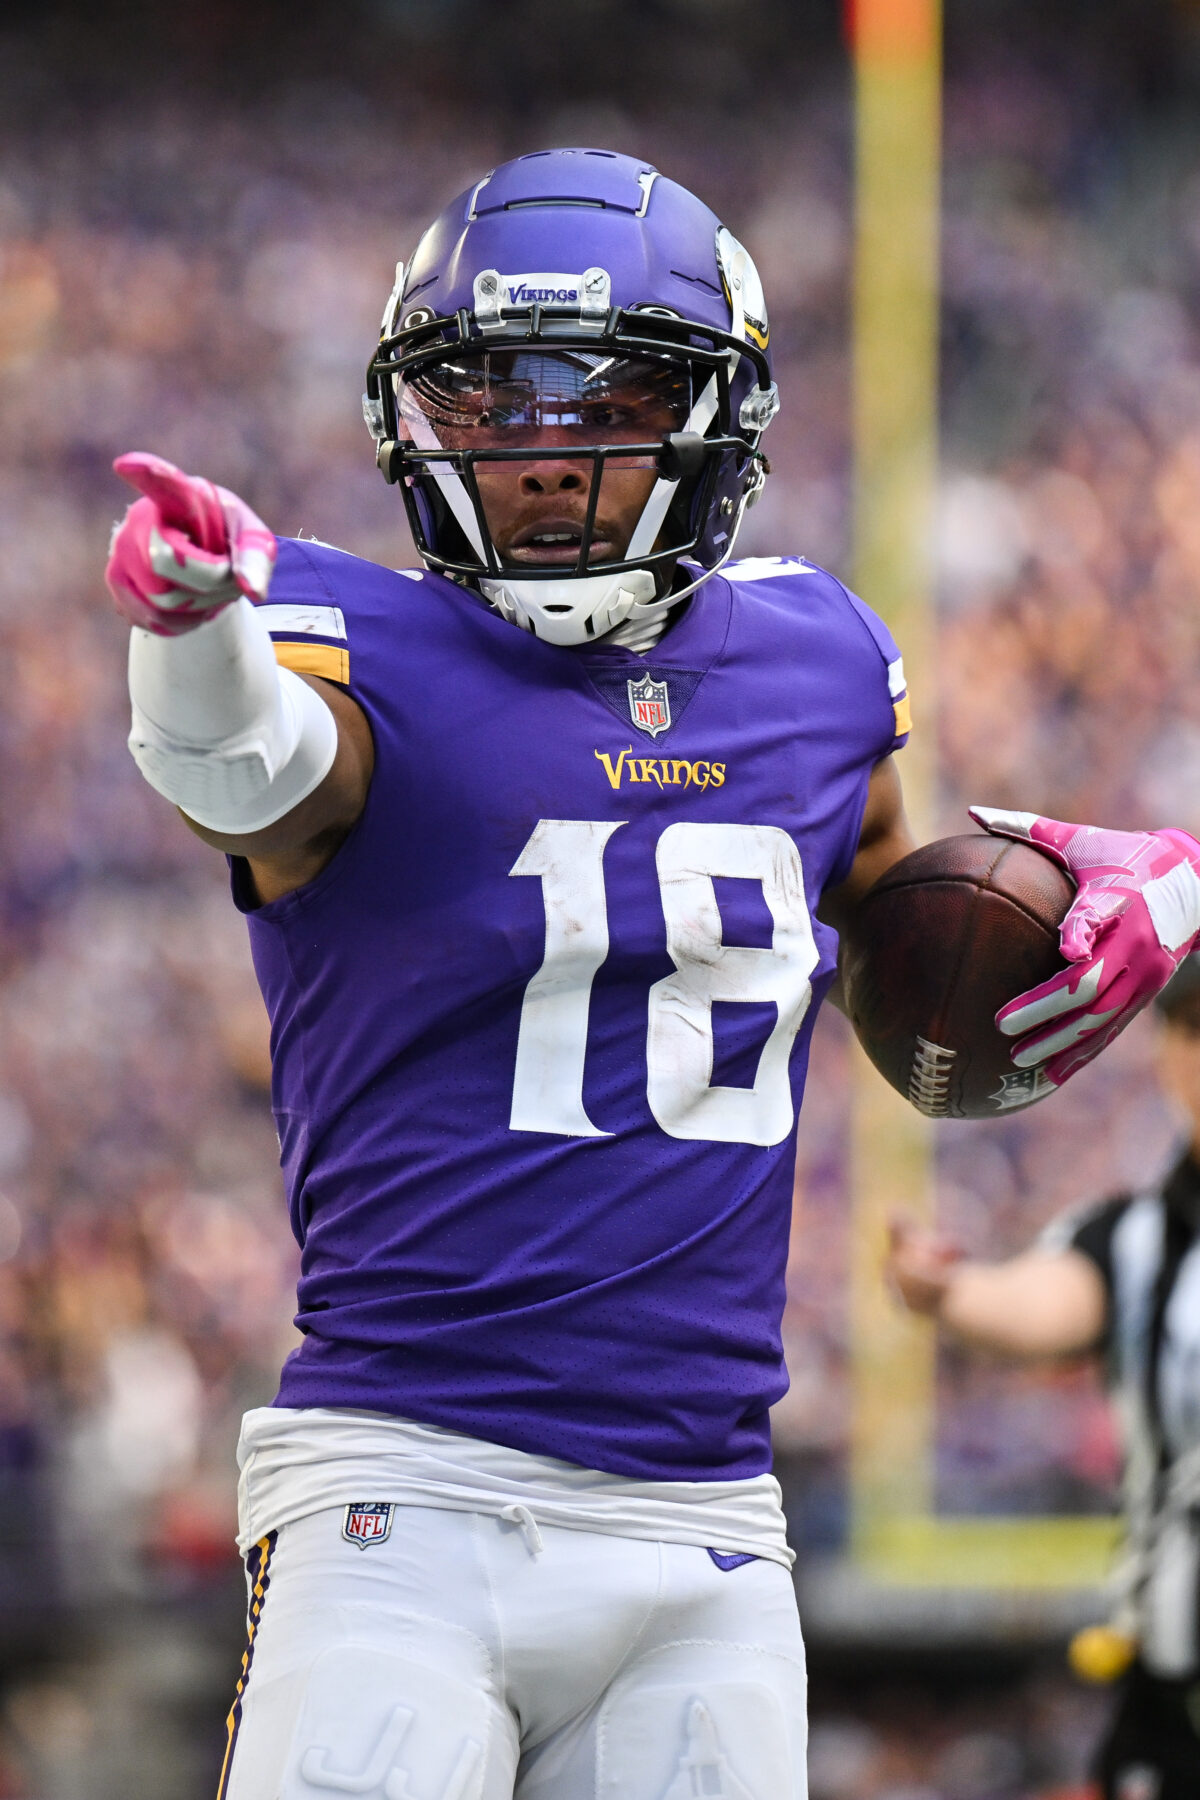 Zulgad: MVP voters shouldn’t pass on Vikings’ Justin Jefferson just because hes a wide receiver